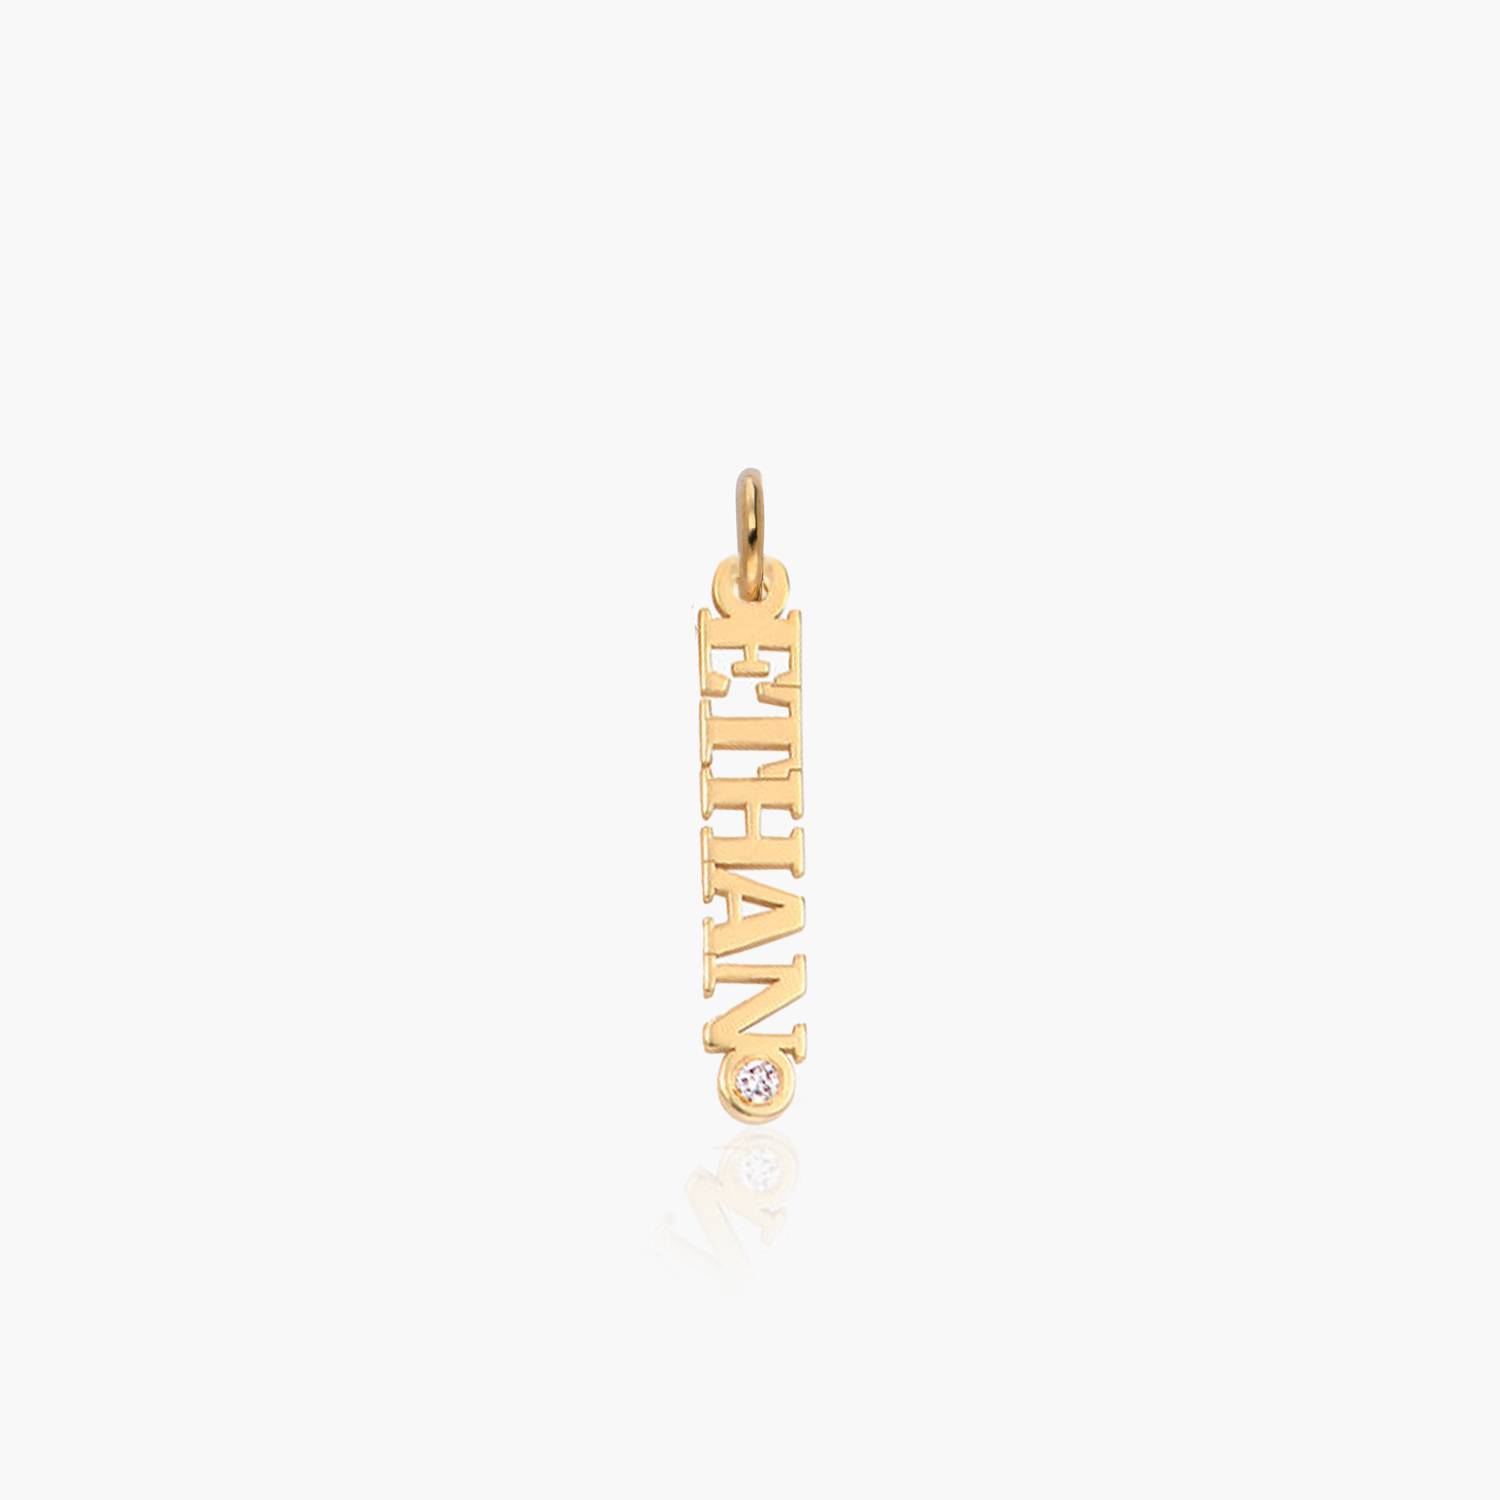 EXTRA Personalized Name Charm with Diamond - Gold Vermeil